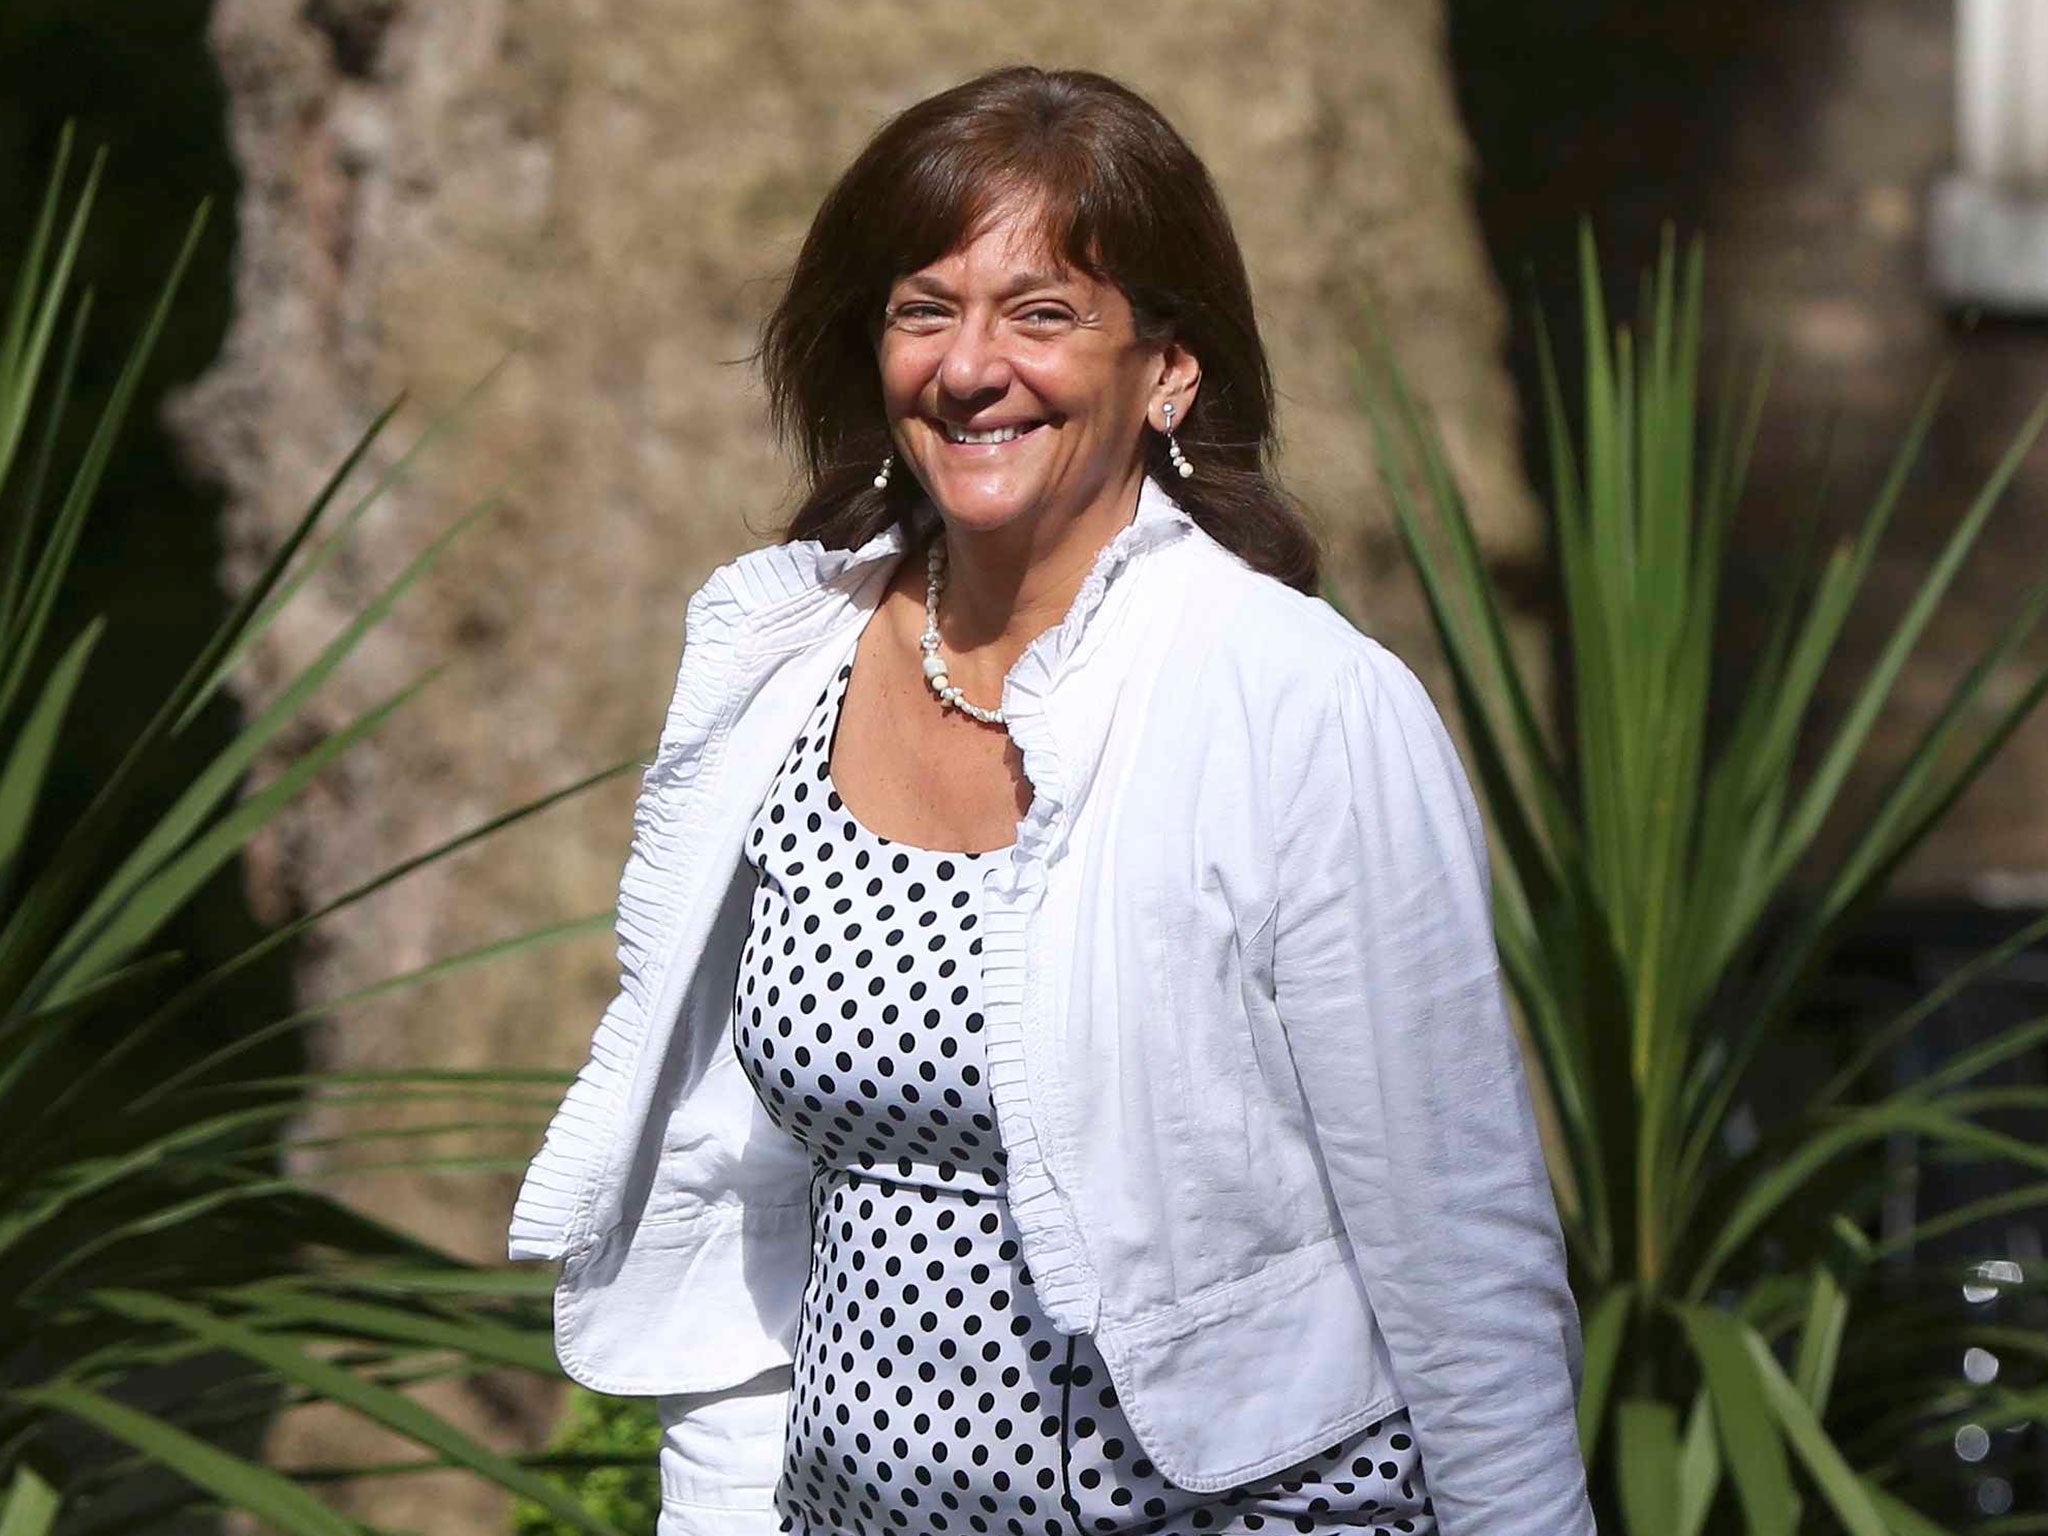 David Cameron has appointed campaigner Ros Altmann as pensions minister